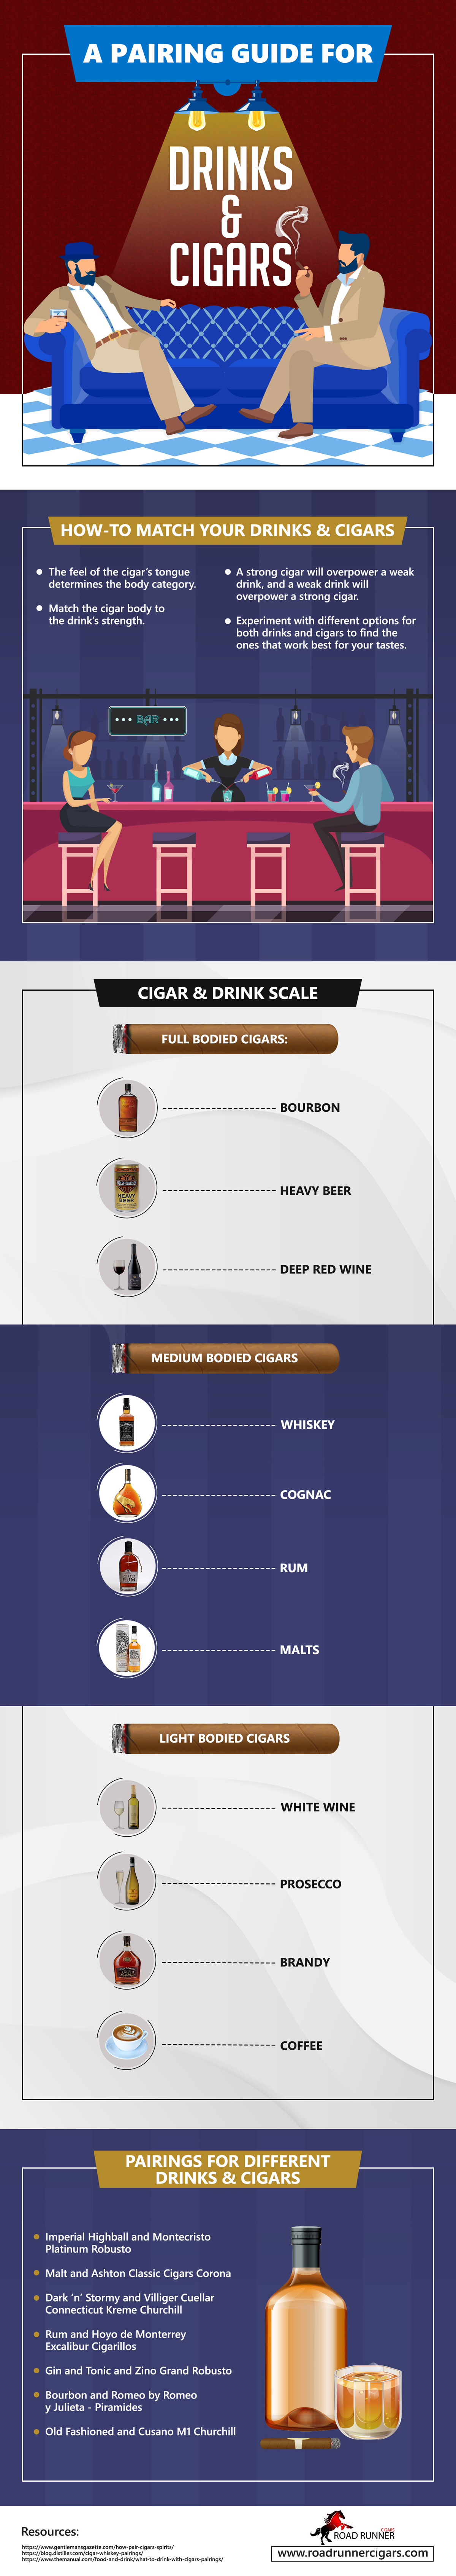 A Pairing Guide for Drinks and Cigars